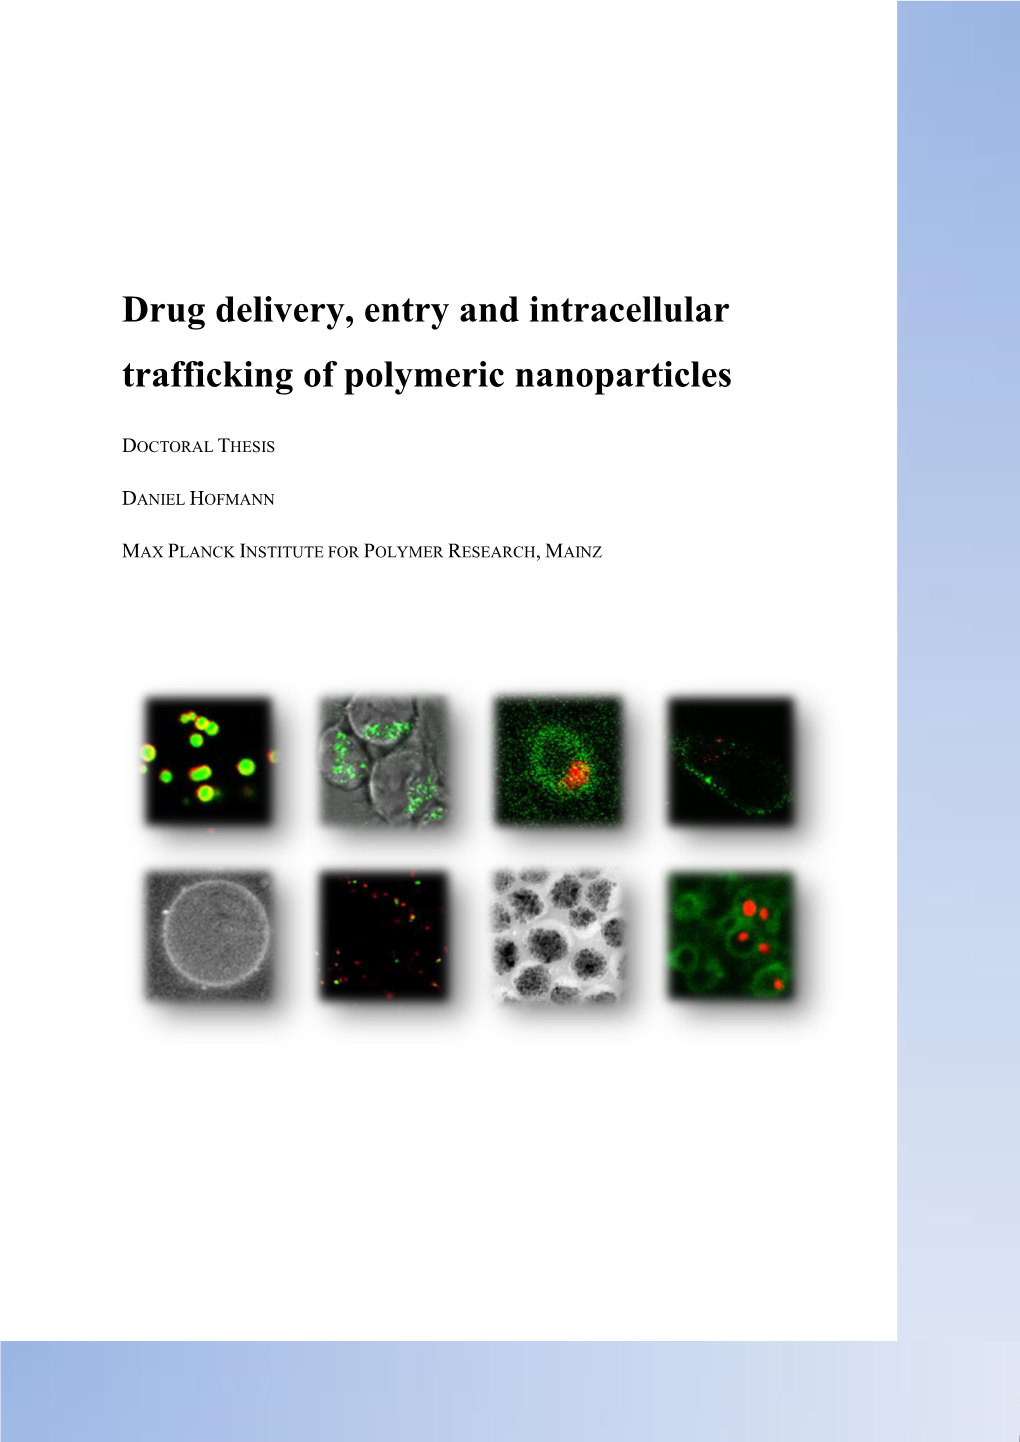 Drug Delivery, Entry and Intracellular Trafficking of Polymeric Nanoparticles